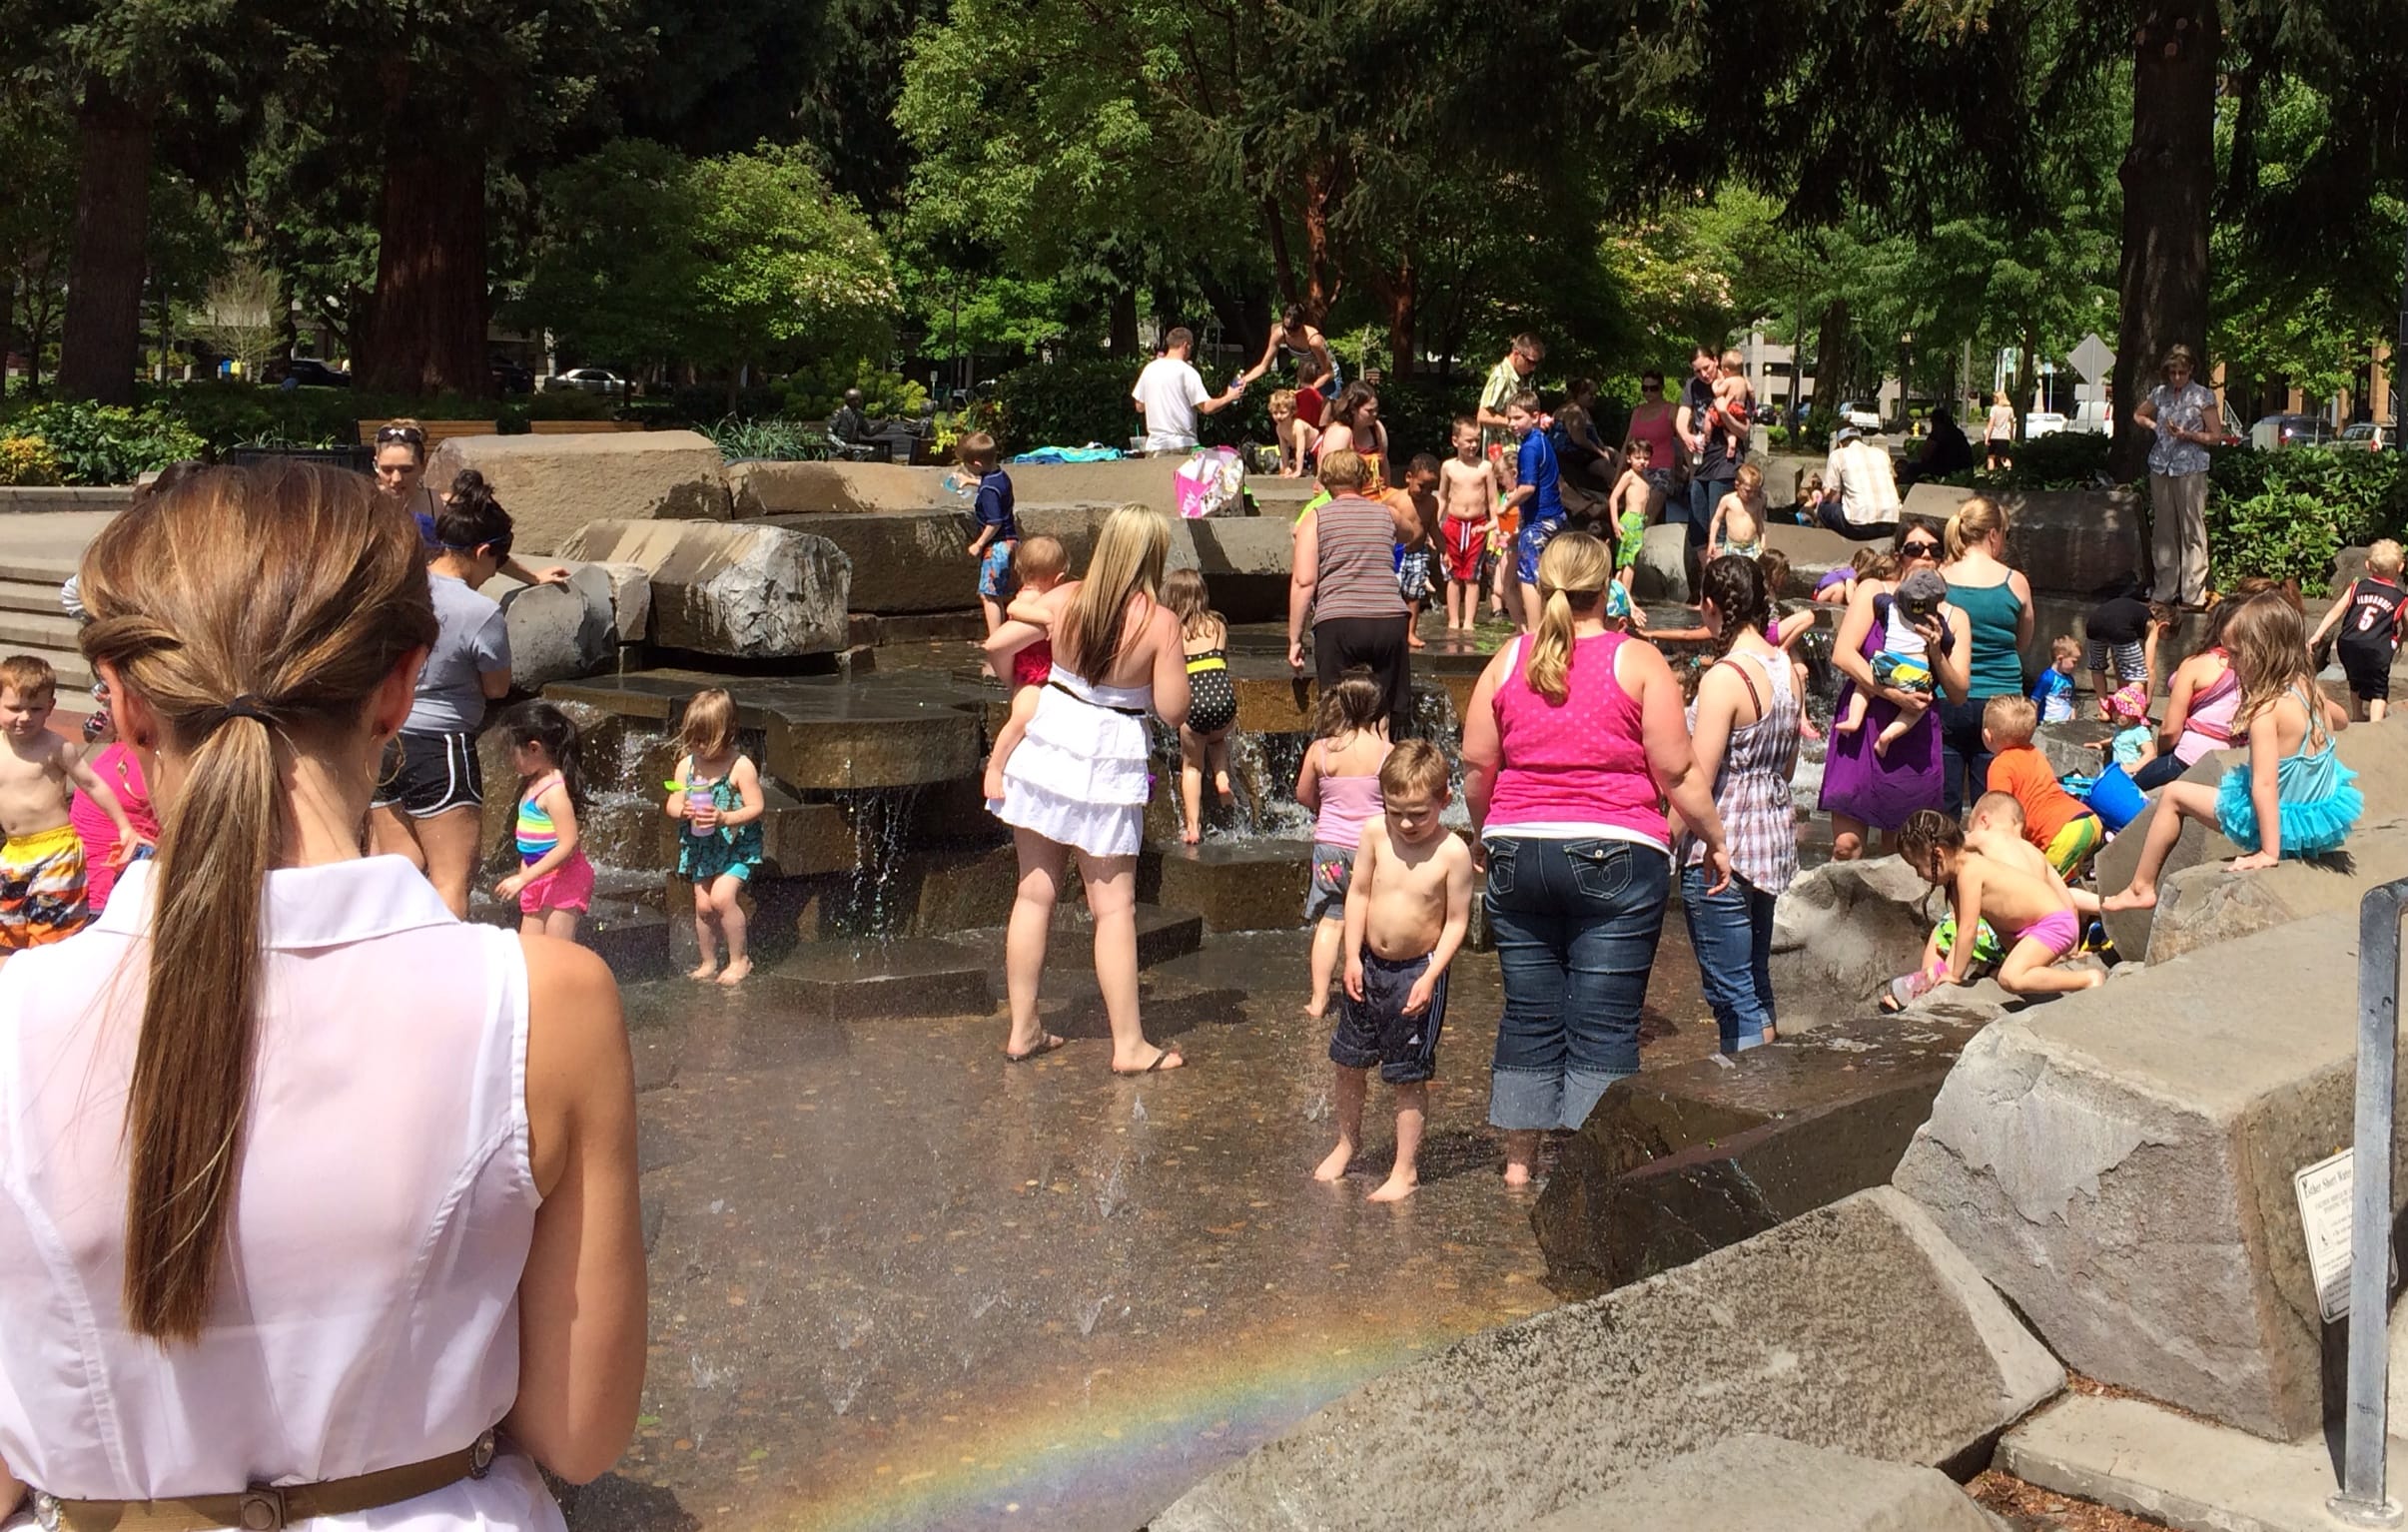 Scenes like this one from May 1, with area children and some adults cooling off in the water at Esther Short Park in downtown Vancouver, may be repeated over the next week as an extended heat wave blankets the region.